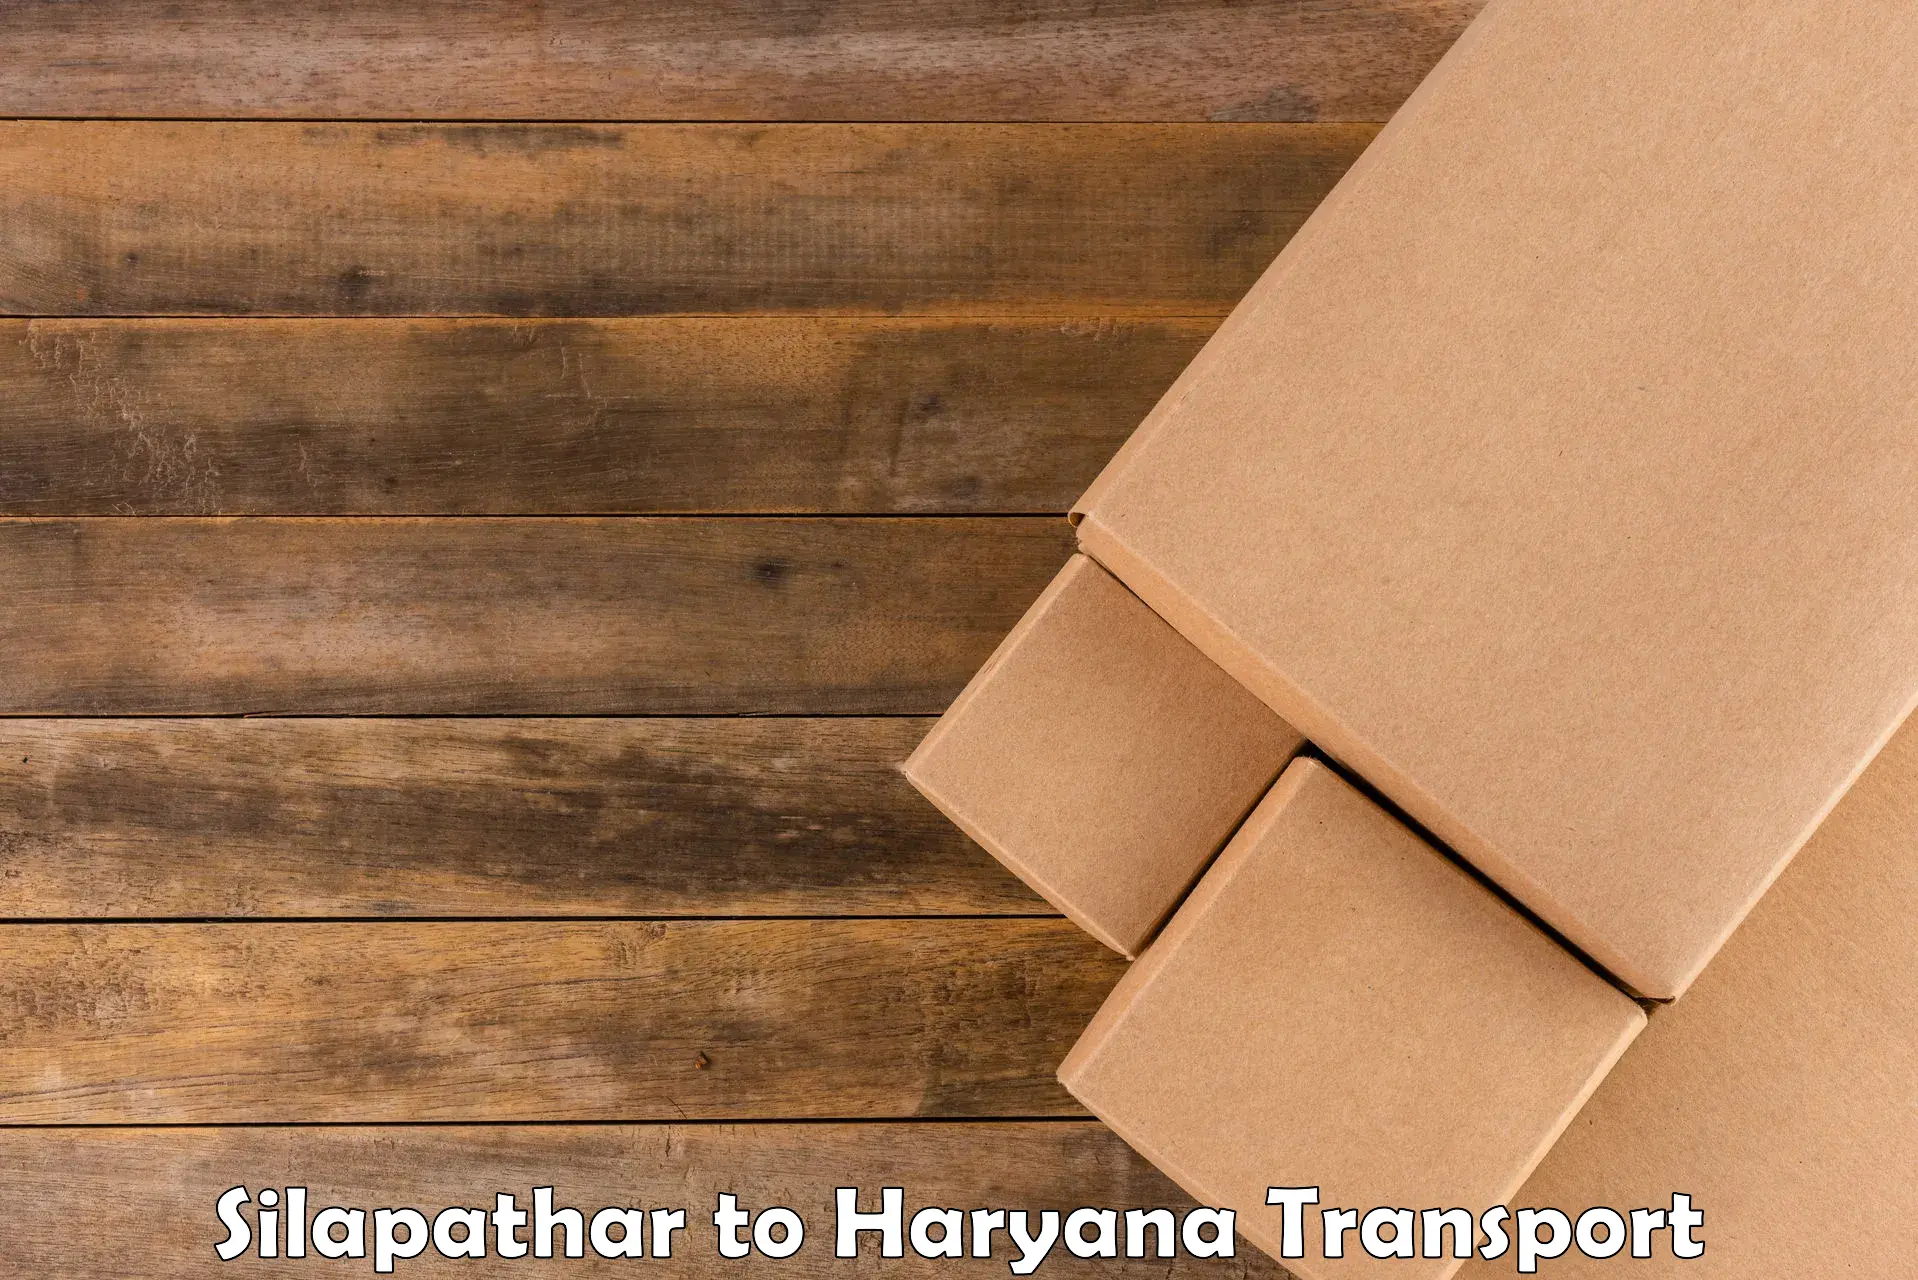 Door to door transport services Silapathar to Gurgaon